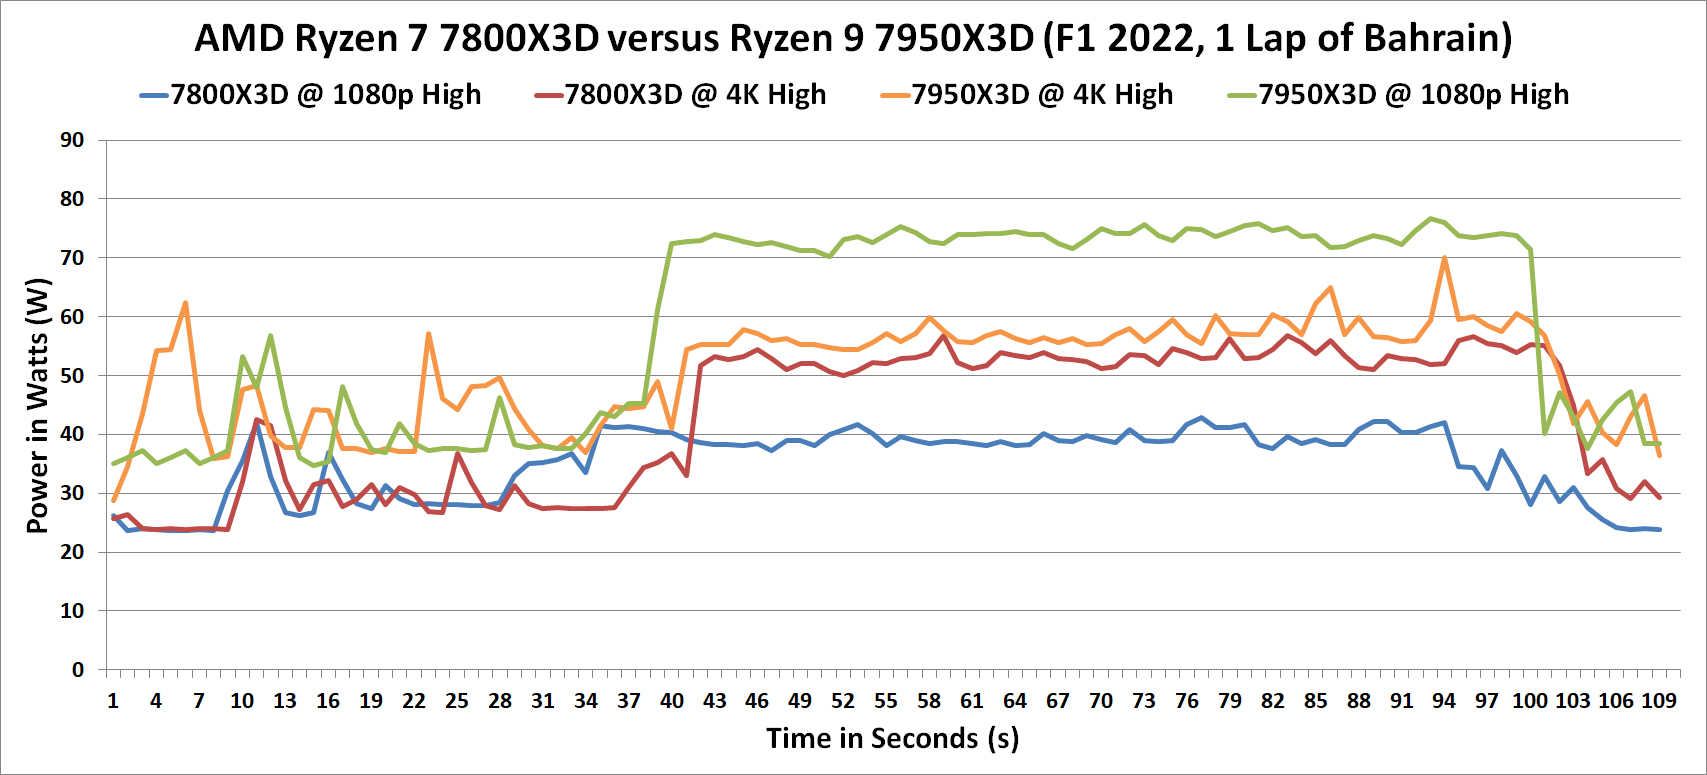 Ryzen 7 7800X3D claimed up to 24% according to AMD benchmark - Zilbest